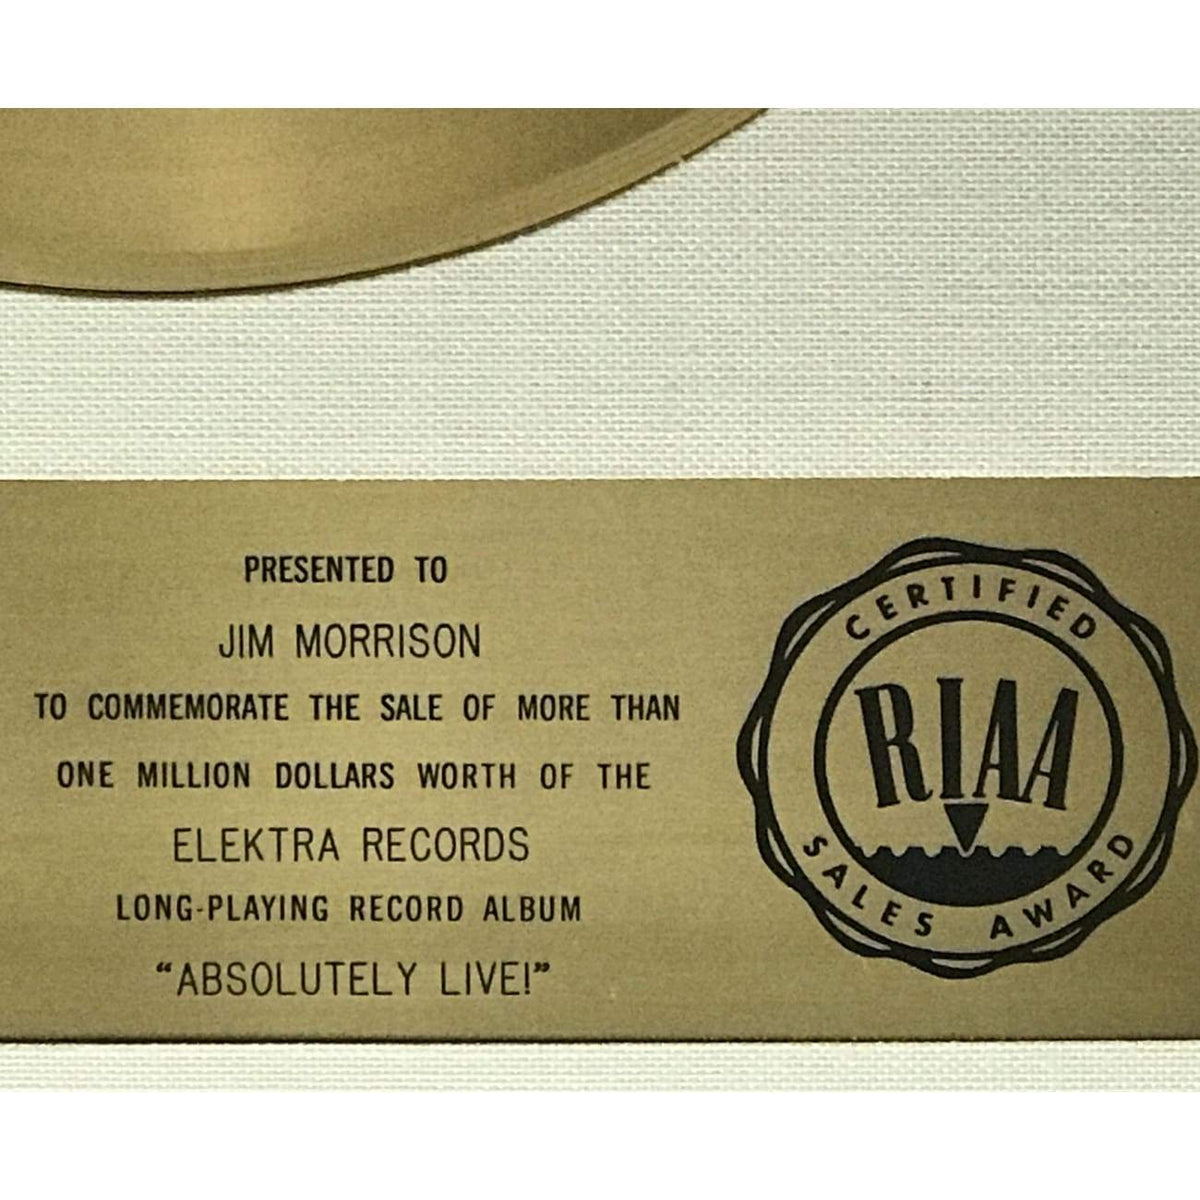 The Doors Absolutely Live! RIAA Gold LP Award presented to Jim